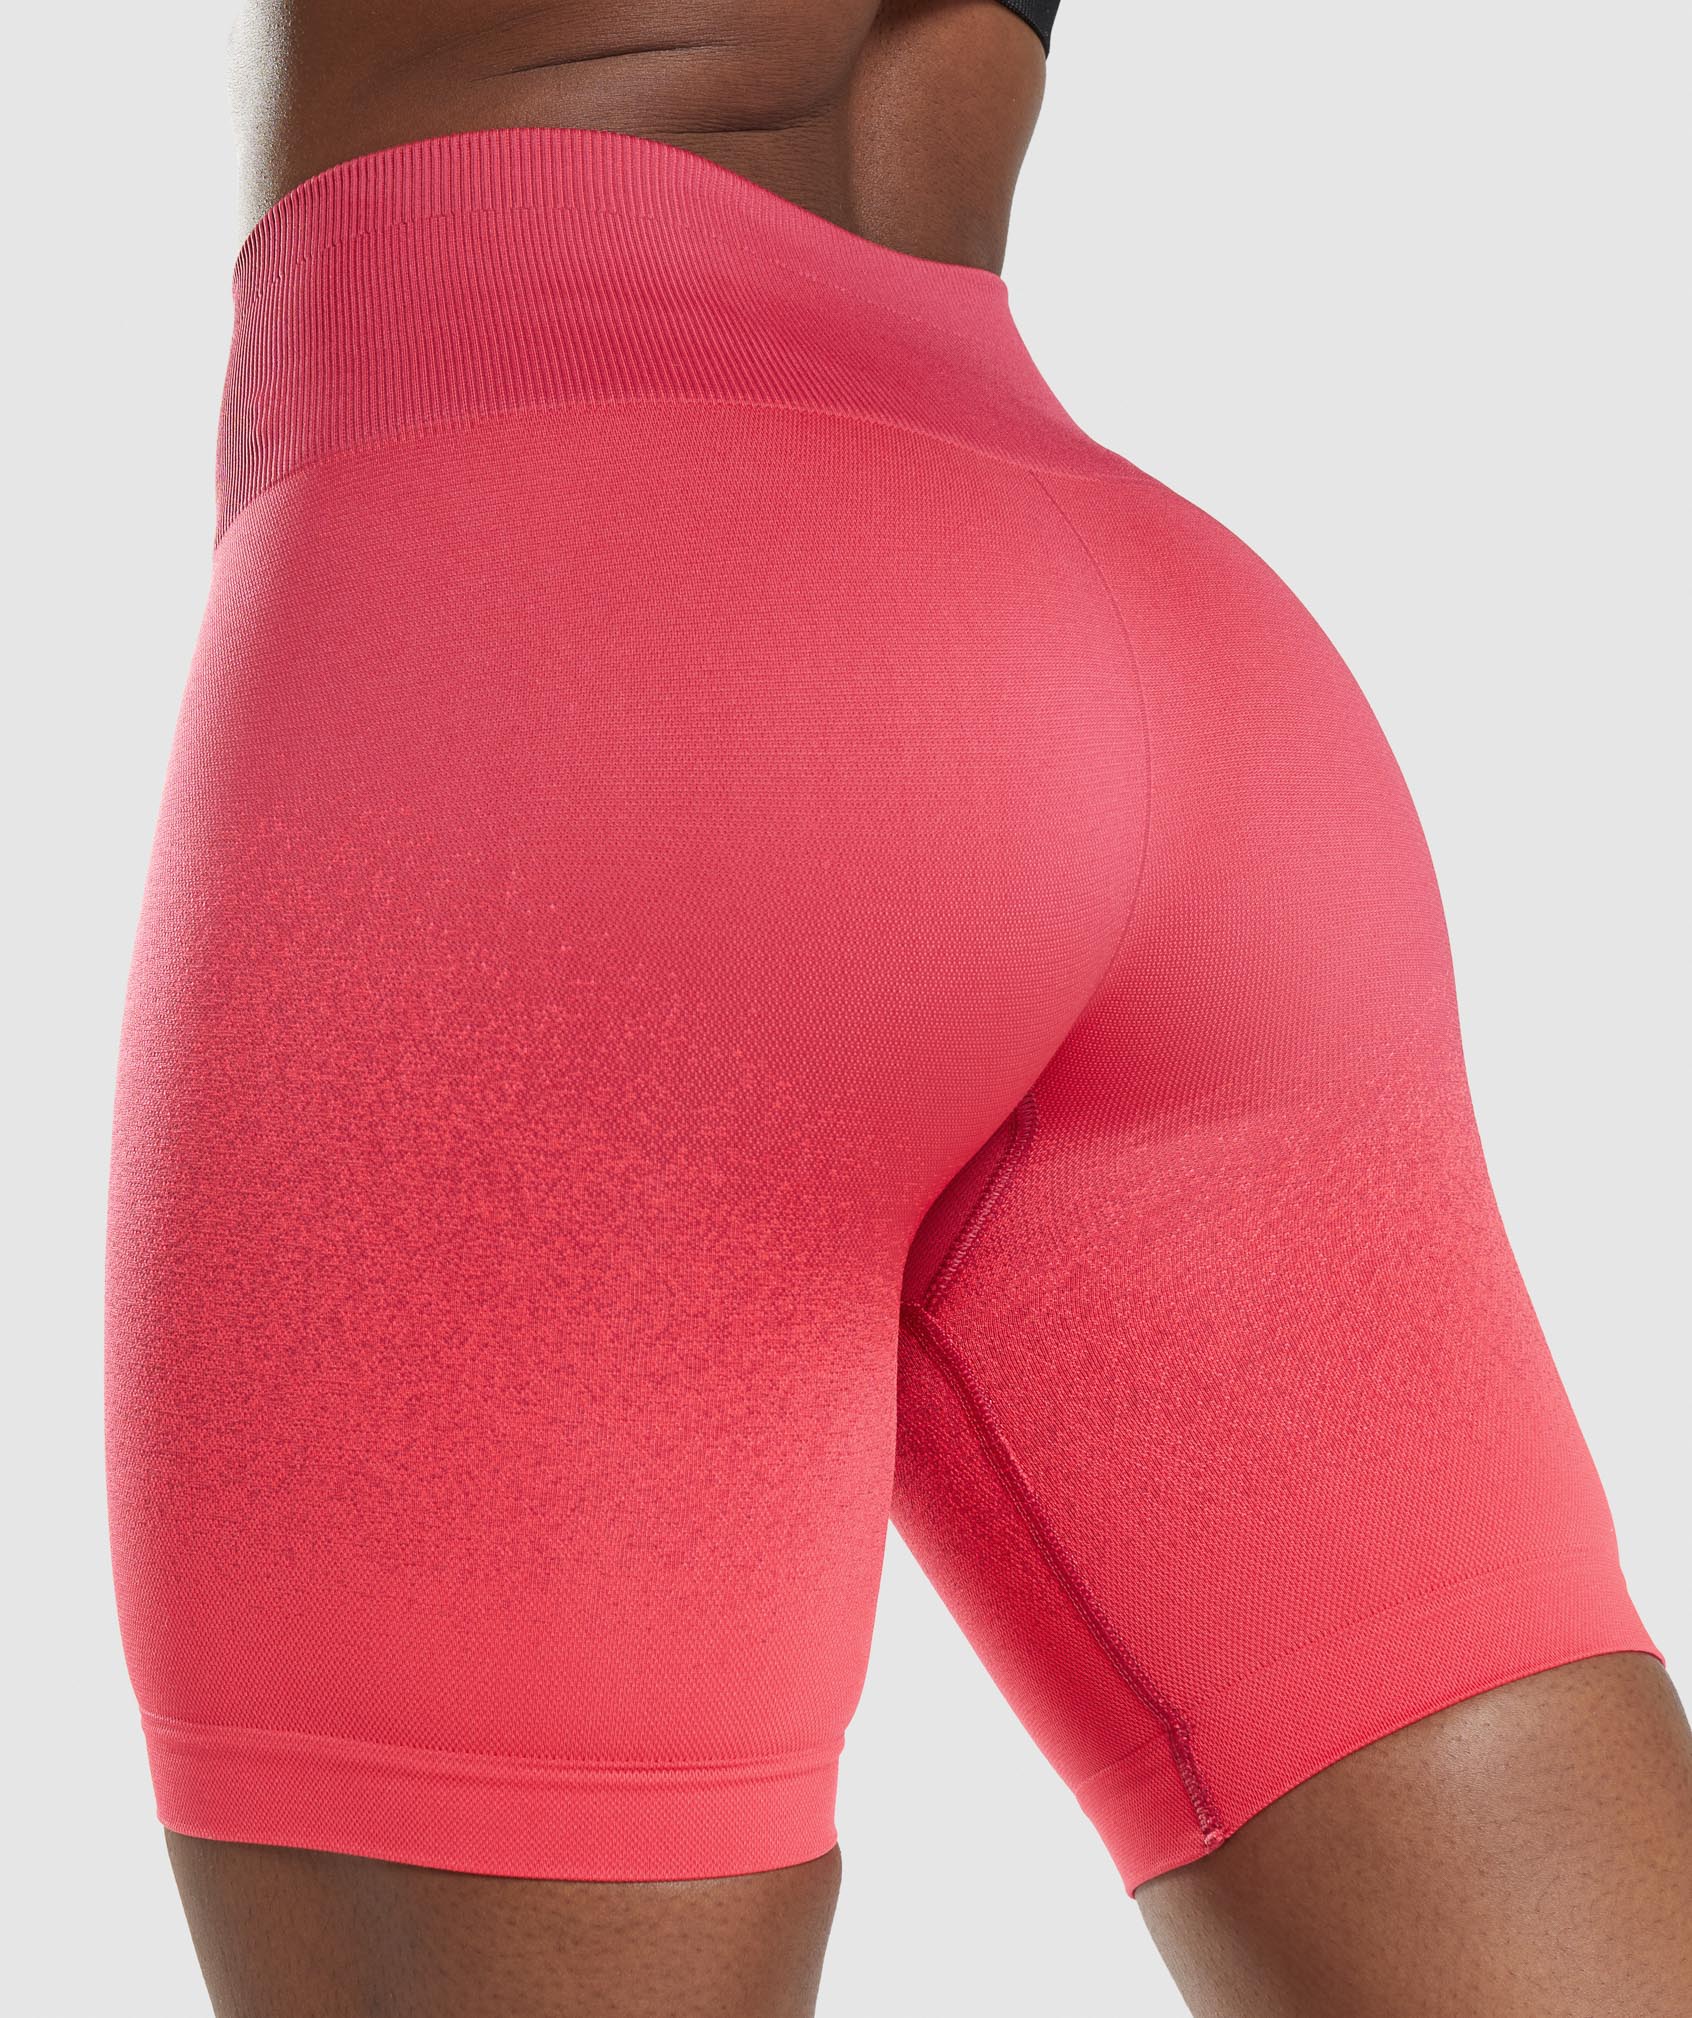 Adapt Ombre Seamless Cycling Shorts in Pink/Red - view 5